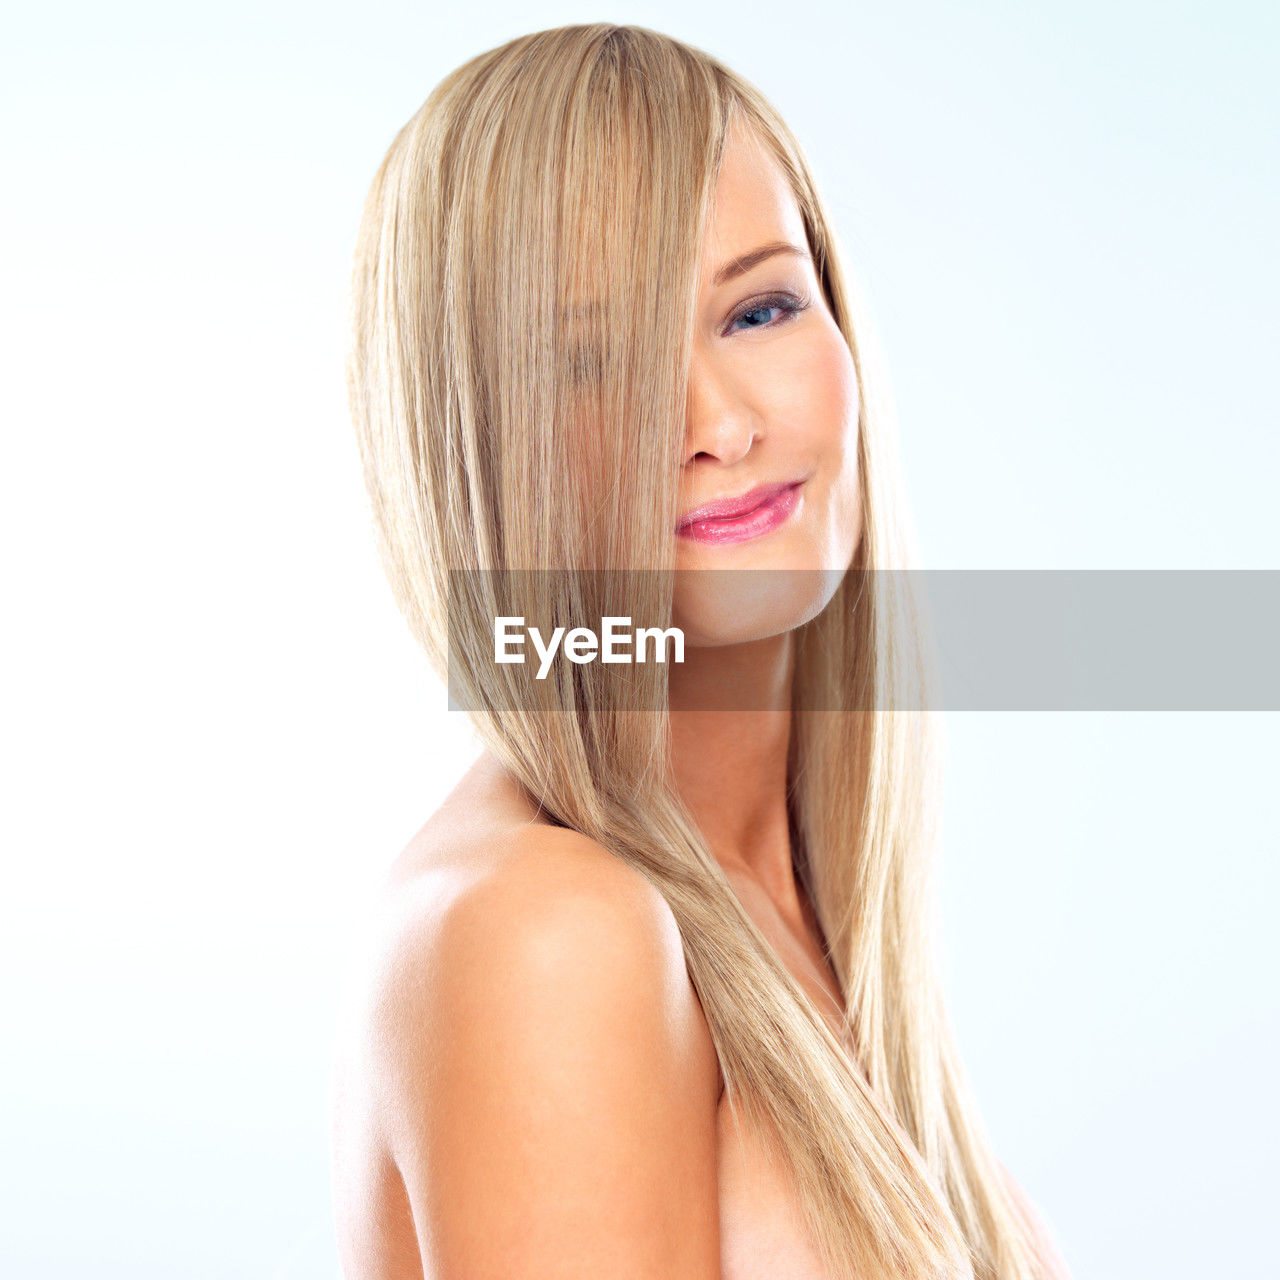 human hair, women, blond hair, portrait, adult, one person, young adult, human face, hairstyle, long hair, studio shot, brown hair, smiling, white background, female, hair color, looking at camera, fashion, cut out, indoors, happiness, headshot, layered hair, cheerful, emotion, skin, human skin, cute, lifestyles, copy space, relaxation, make-up, clothing, finger, human head, black hair, positive emotion, smile, teeth, nose, person, looking, close-up